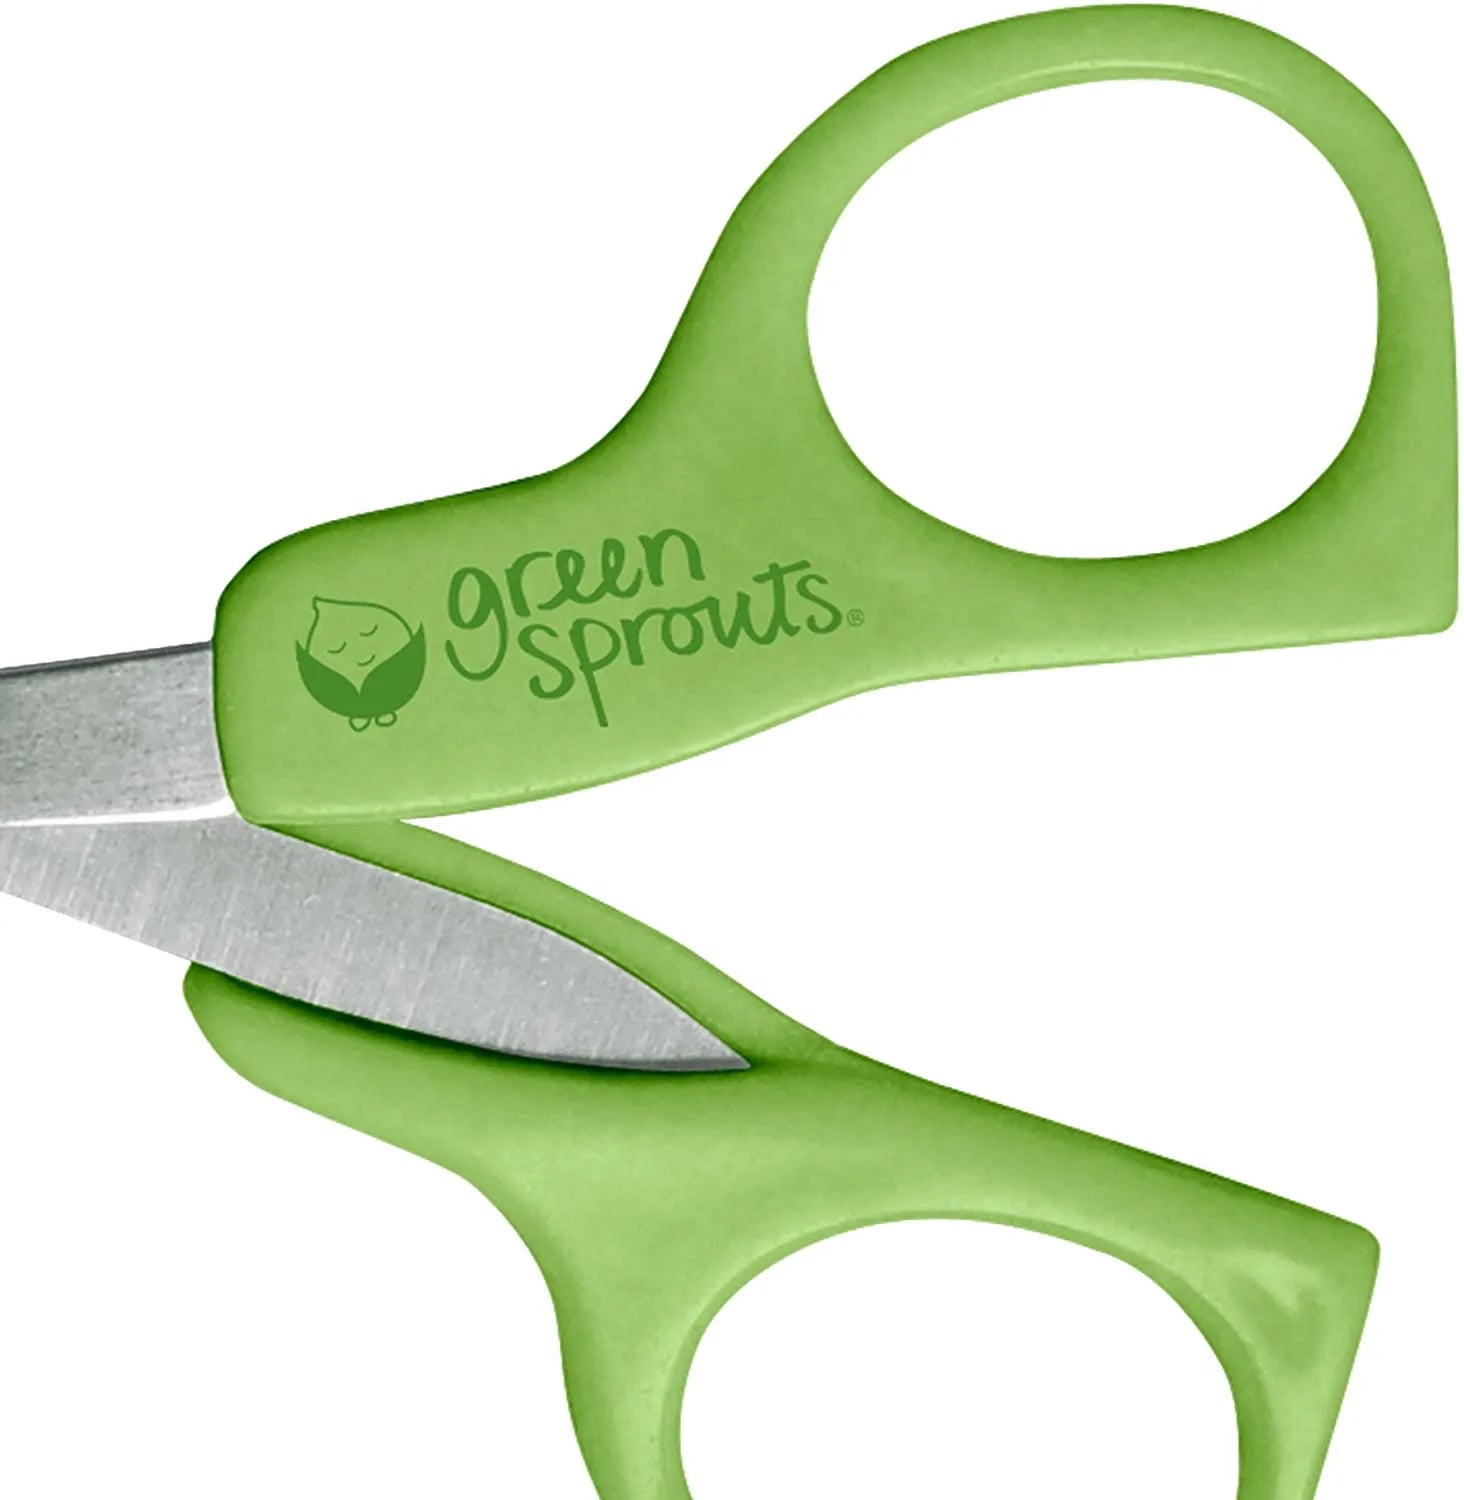 Baby Nail Scissors- Adult Use Only (Green)